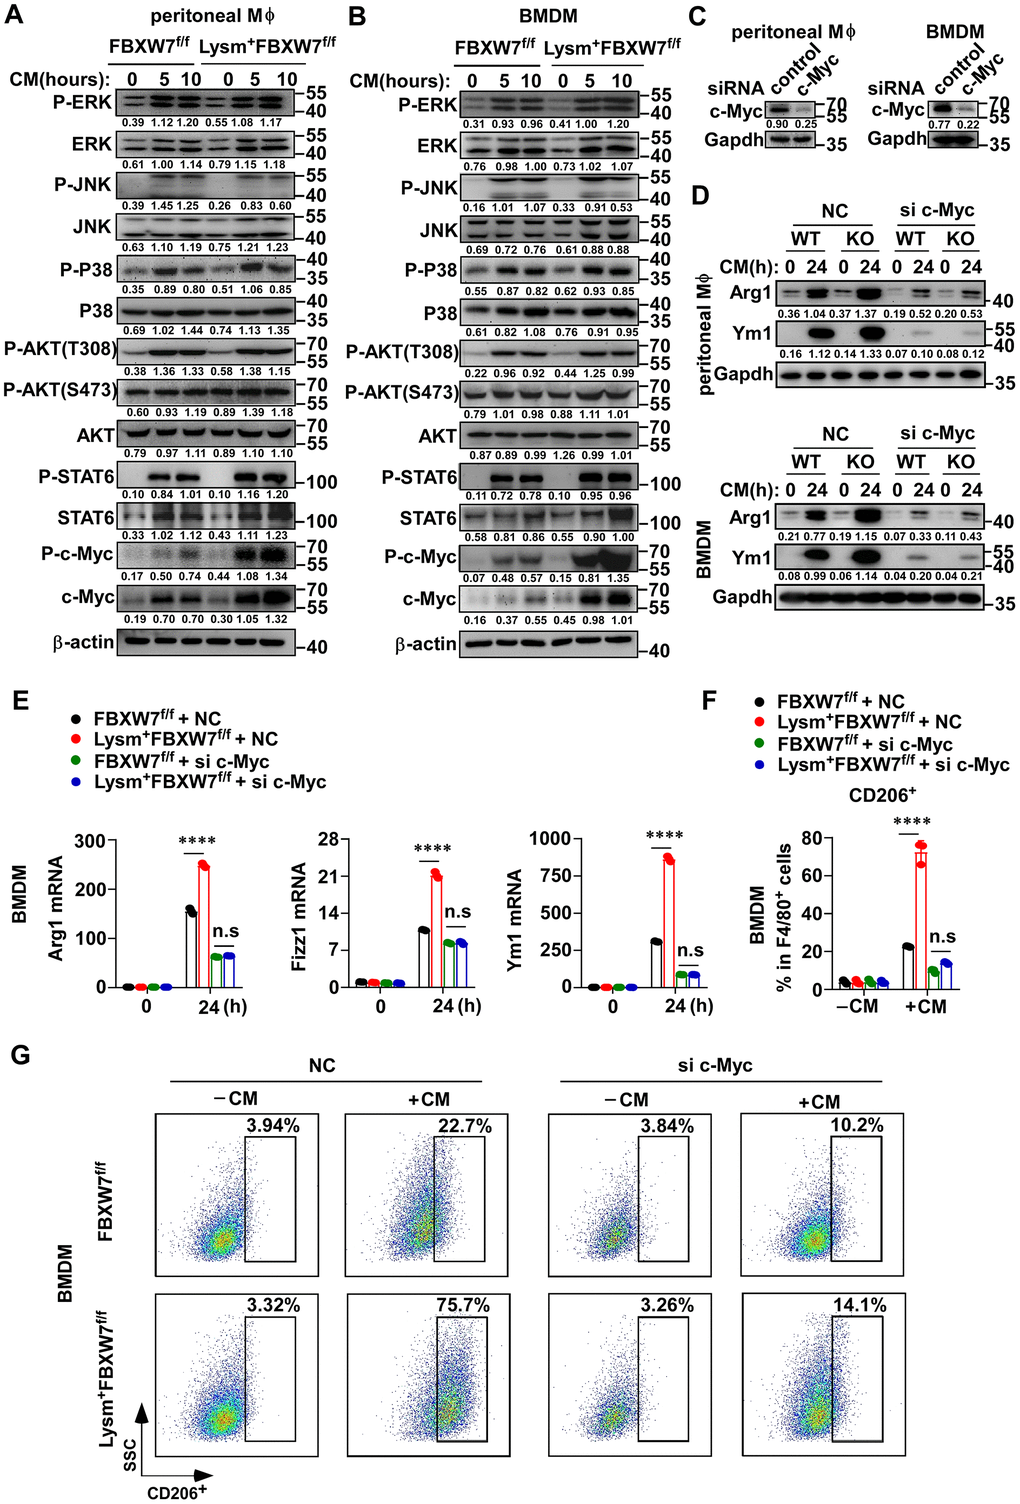 The role of FBXW7 in regulating M2 macrophage polarization is dependent on c-Myc. (A, B) Peritoneal macrophages (A) and BMDMs (B) derived from FBXW7f/f and Lysm+FBXW7f/f mice were stimulated with conditioned medium for the indicated time periods. The phosphorylated or total proteins related to M2 macrophage polarization were analyzed by immunoblotting. (C) Immunoblotting was used to analyze the interference efficiency of c-Myc siRNA in primary macrophages following stimulation with conditioned medium for 12 hours. (D, E) Immunoblotting (D) and qRT-PCR analysis (E) of Arg1 and Ym1 expression in primary macrophages from FBXW7f/f and Lysm+FBXW7f/f mice transfected with or without c-Myc siRNA and stimulated with conditioned medium. (F, G) Statistical analysis (F) and flow cytometry analysis (G) of the percentage of M2 macrophages (CD206+) in wild-type and FBXW7-knockout macrophages transfected with or without c-Myc siRNA and stimulated with conditioned medium. Data are shown as the mean ± SD and are representative of three independent experiments. ****P E, F)).